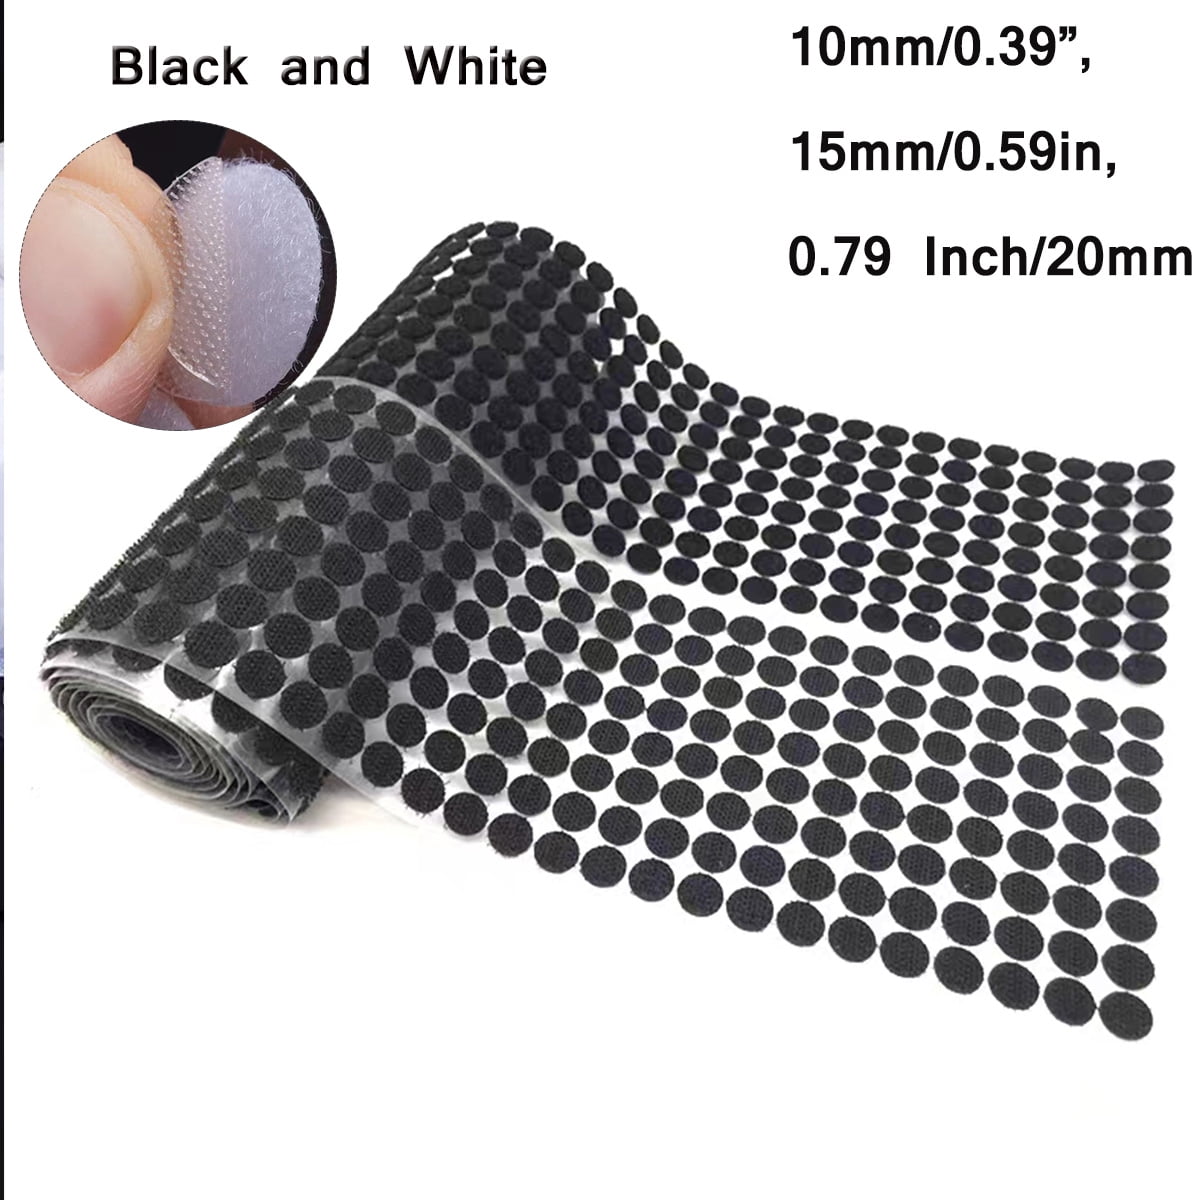 VELCRO Brand Dots with Adhesive White